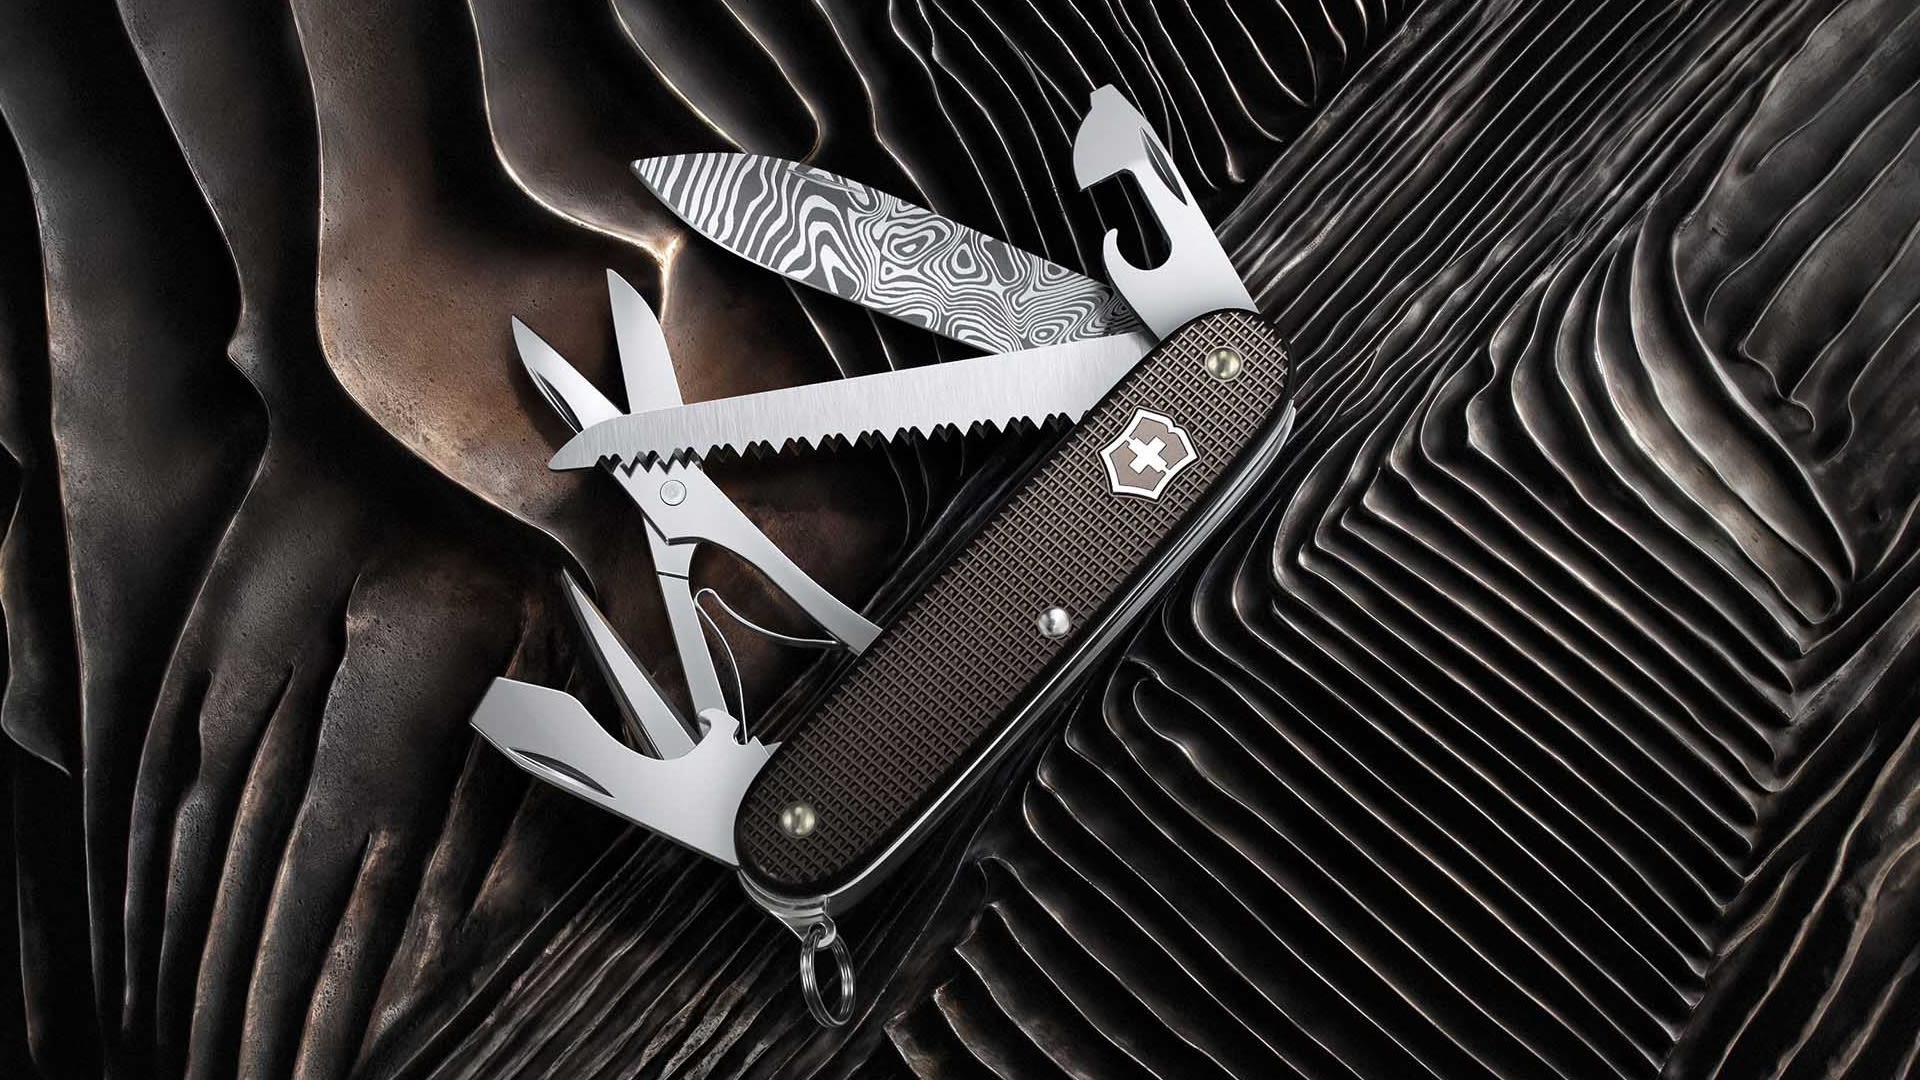 The makers of Swiss Army Knife bring a Finnish vibe to a seriously stylish new multitool